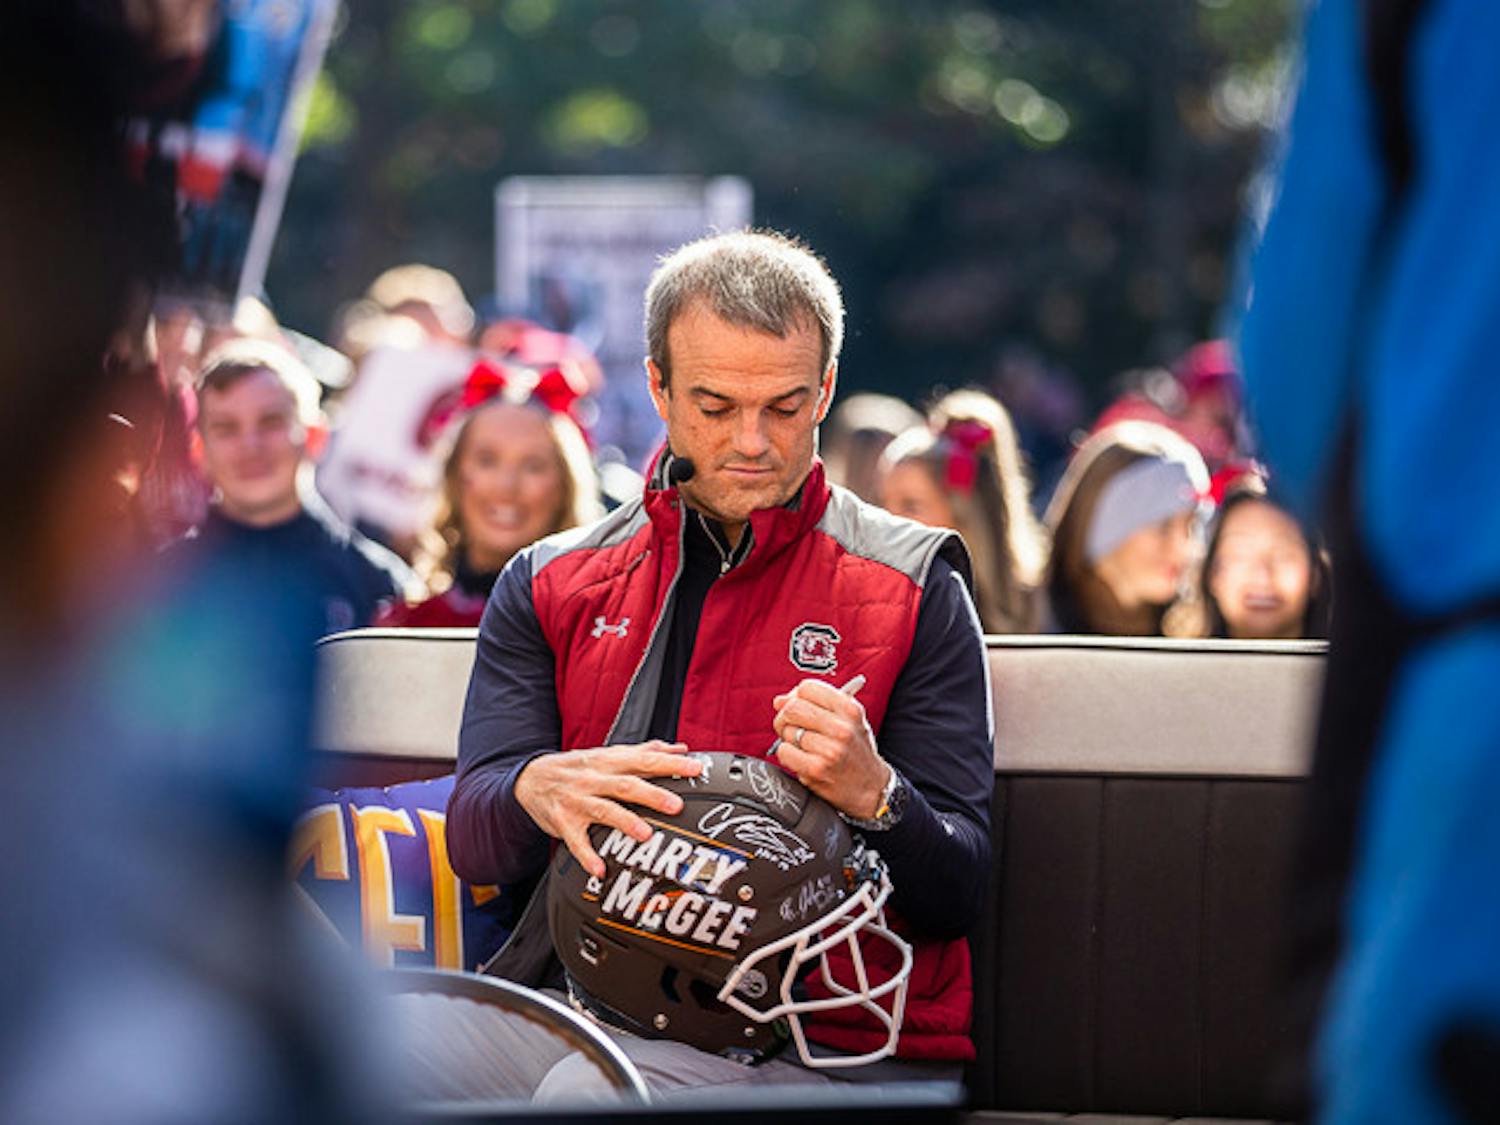 Head coach Shane Beamer signs one of the helmets at the end of his interview during the Marty &amp; McGee pregame show on Nov. 19, 2022. The pregame show took place at the Horseshoe prior to SEC Nation.